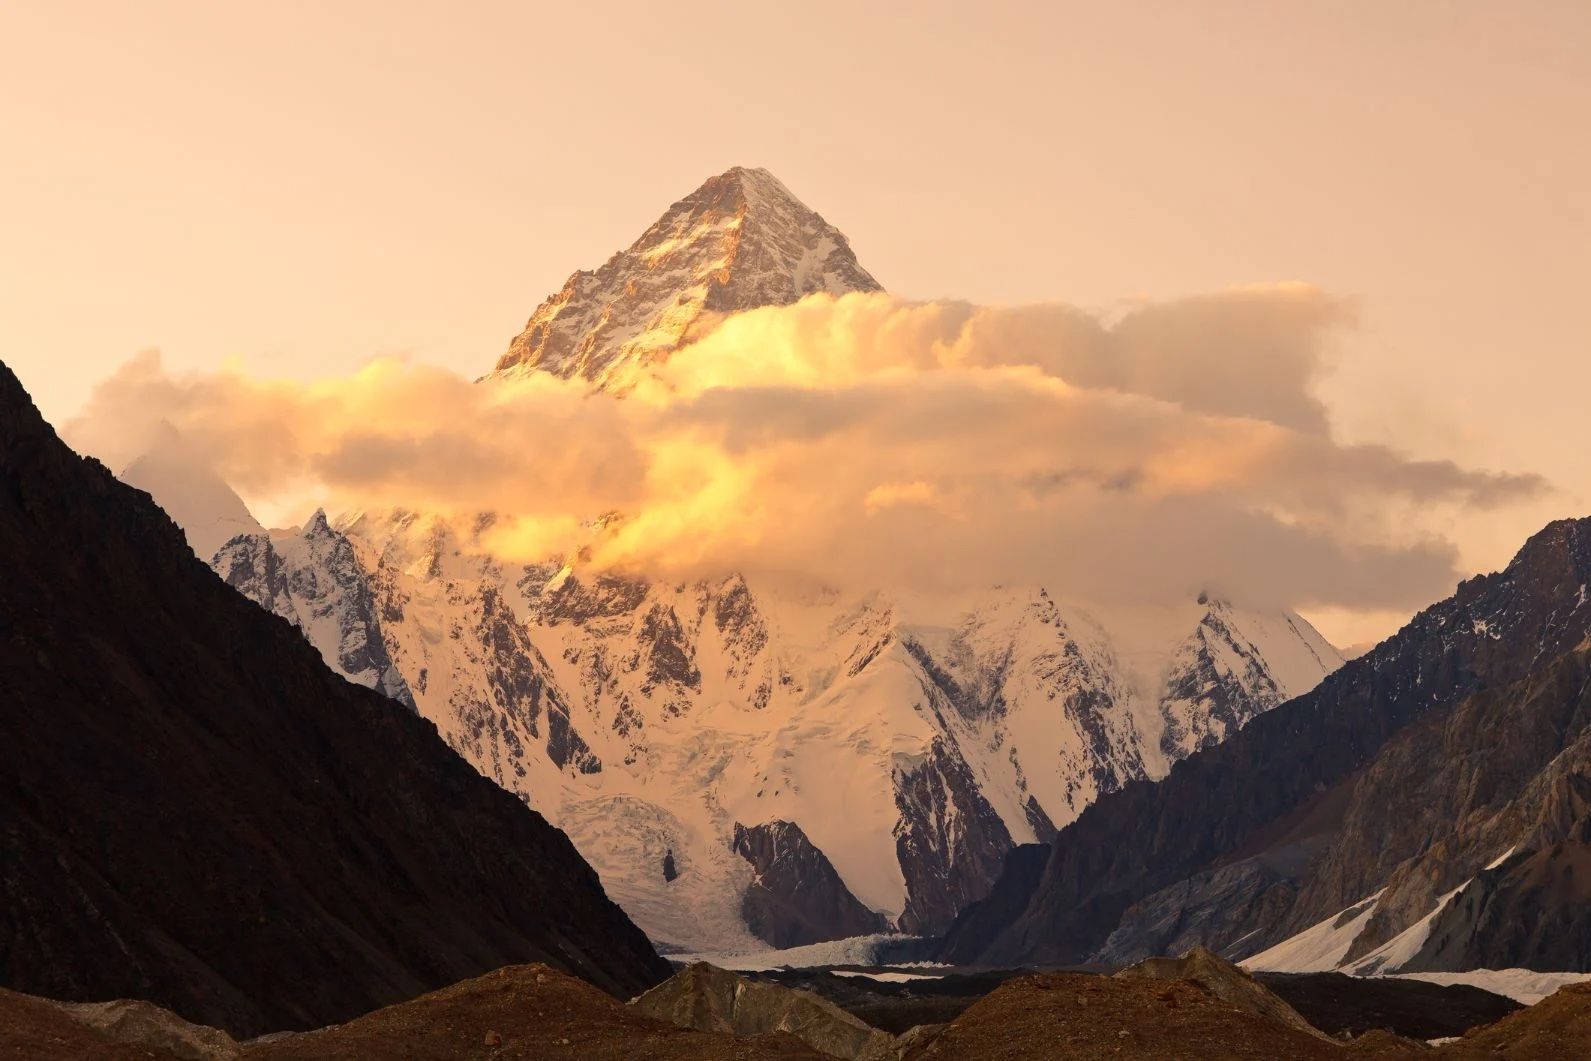 A view of K2.